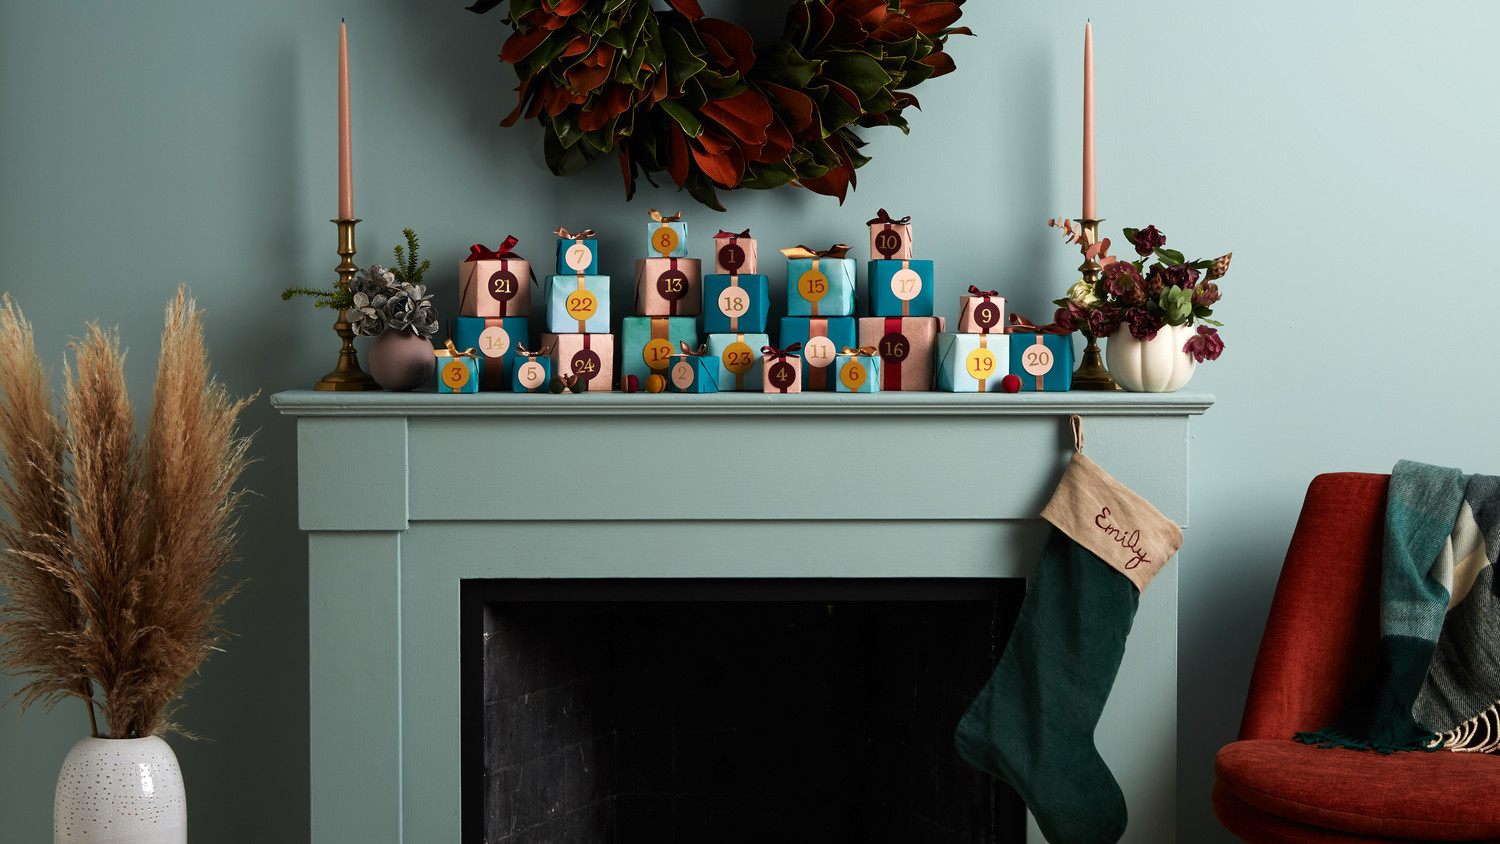 mantle blue wall with advent calendar presents stocking candles wreath